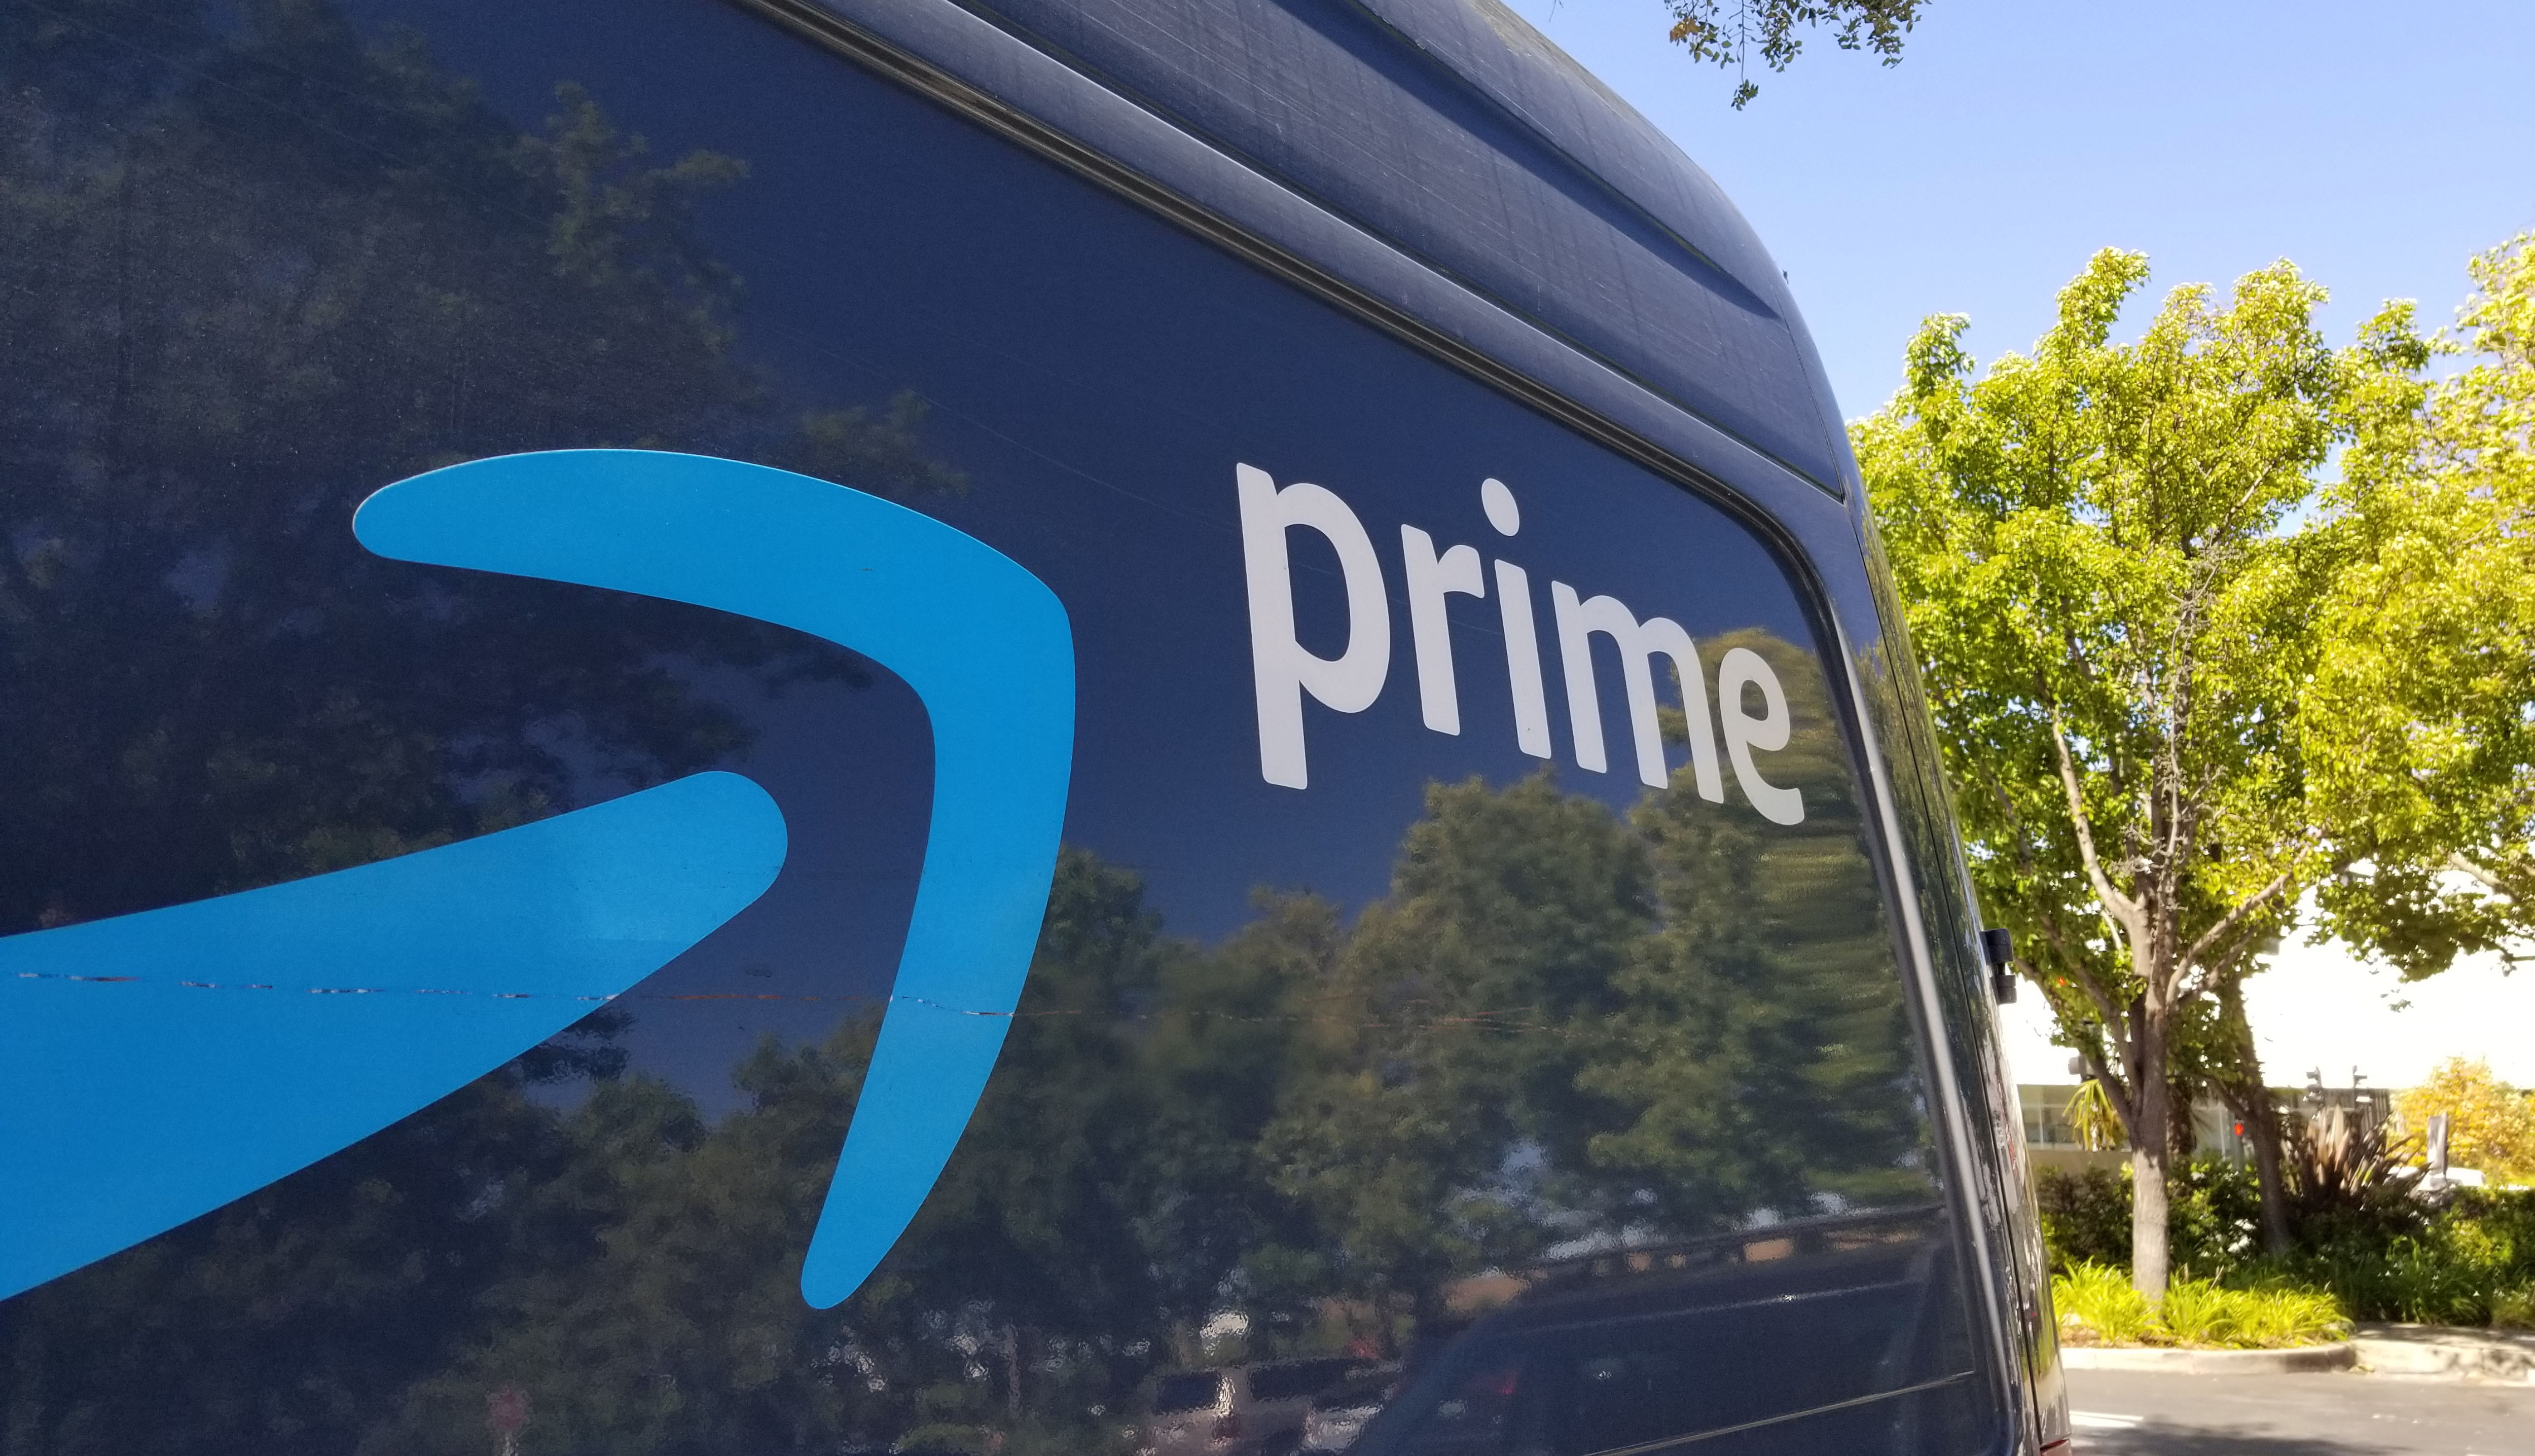 The FTC has filed a complaint against Amazon for coercive practices in enrolling customers in Amazon Prime.